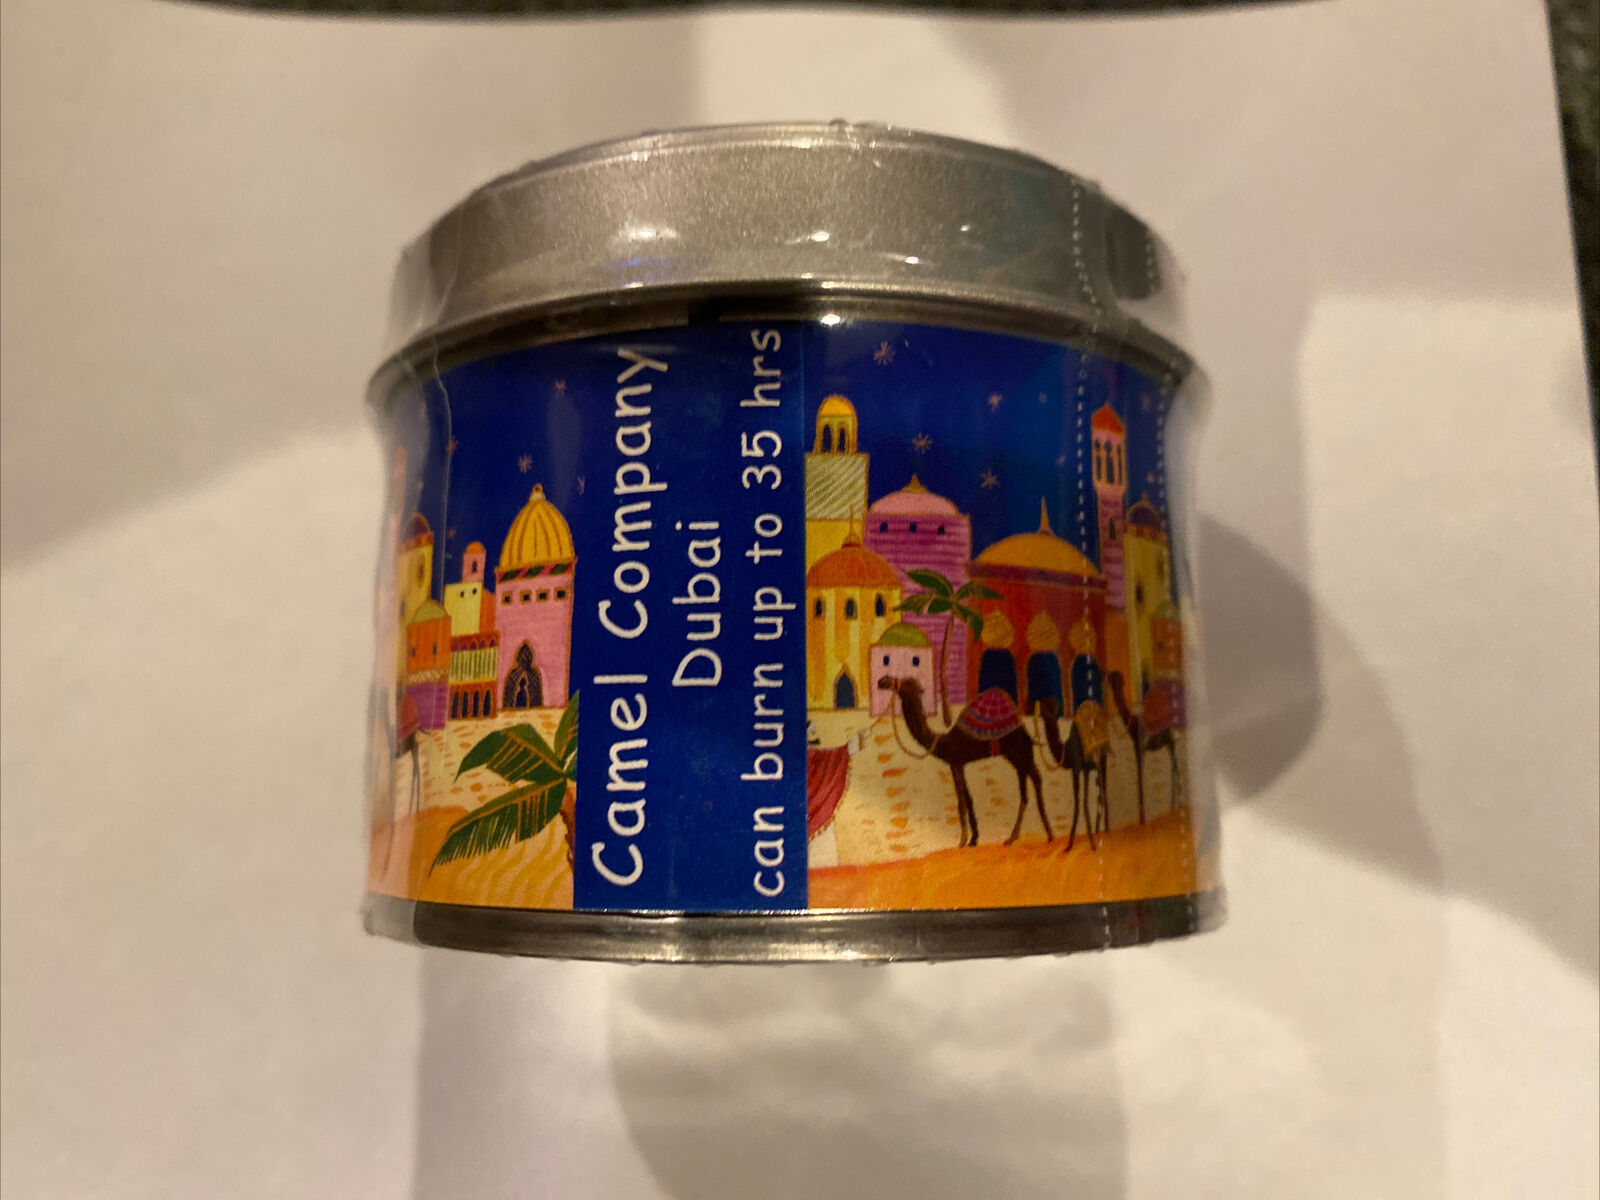 Dubai Camel Company Ranking lowest price integrated 1st place Candle